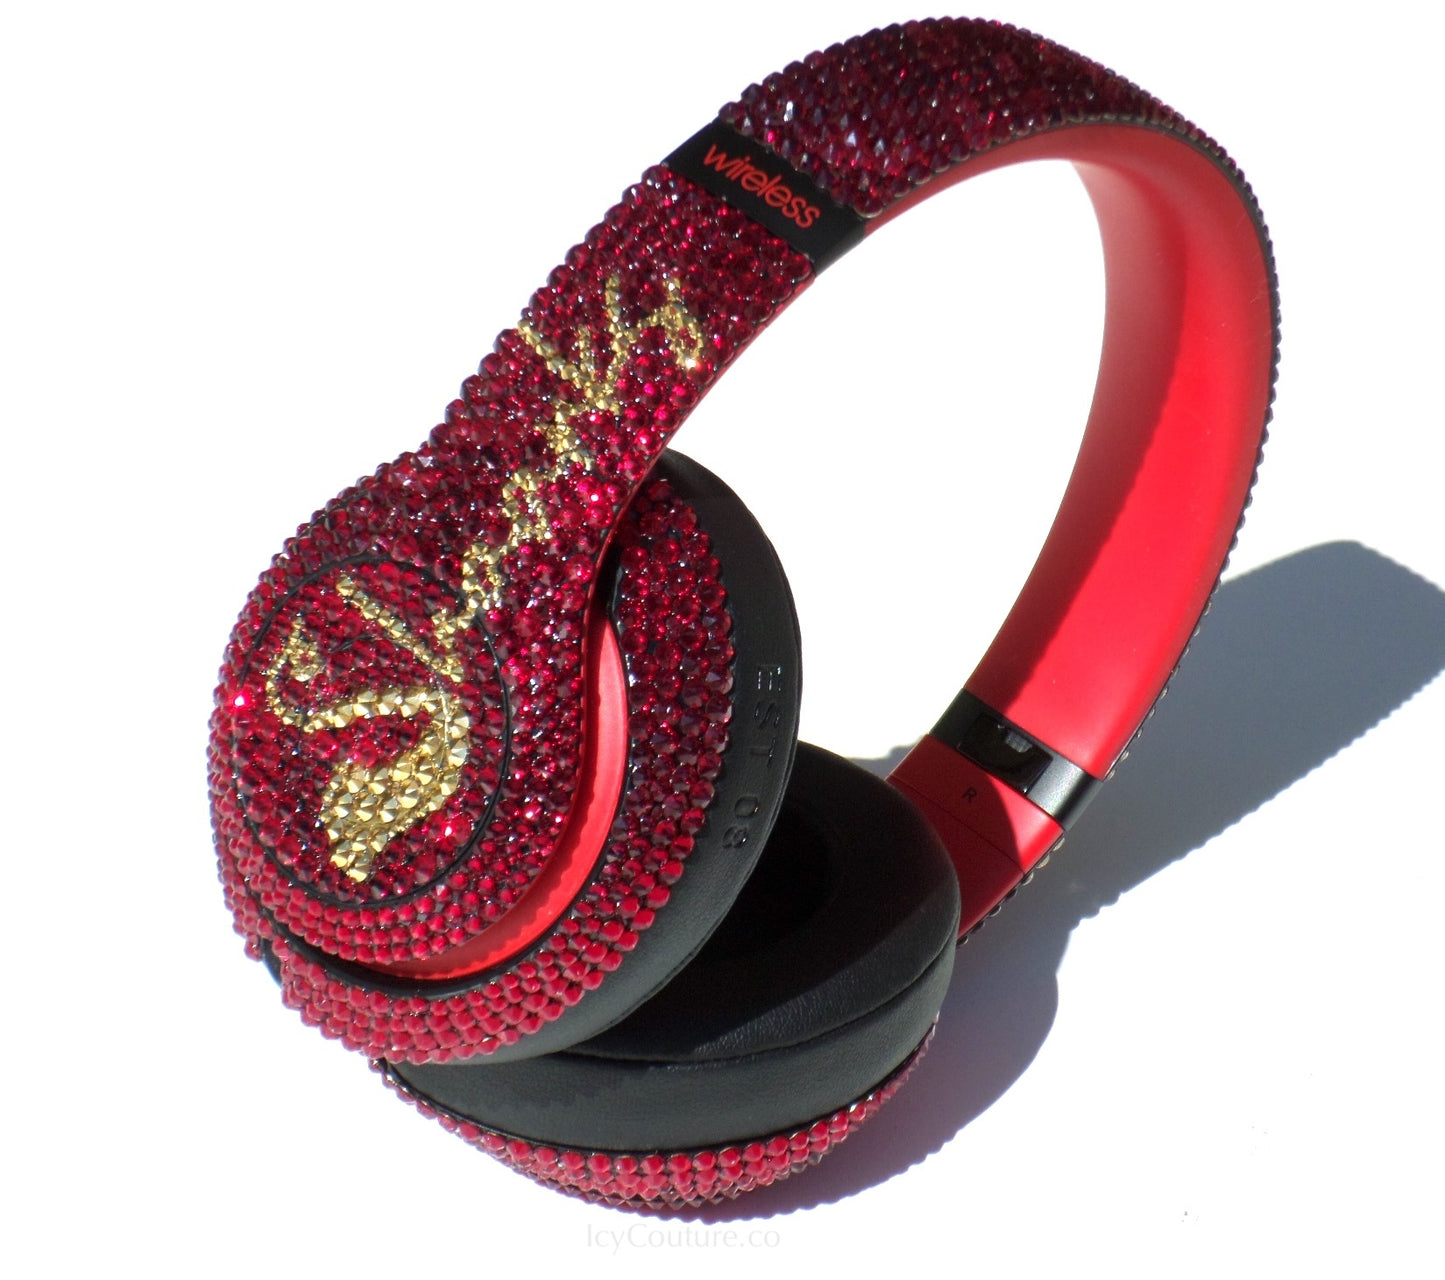 Add your name: Red Bling Beats Headphones custom crystallized with Swarovski Crystal or Premium Glass Rhinestones, Bedazzled by ICY Couture